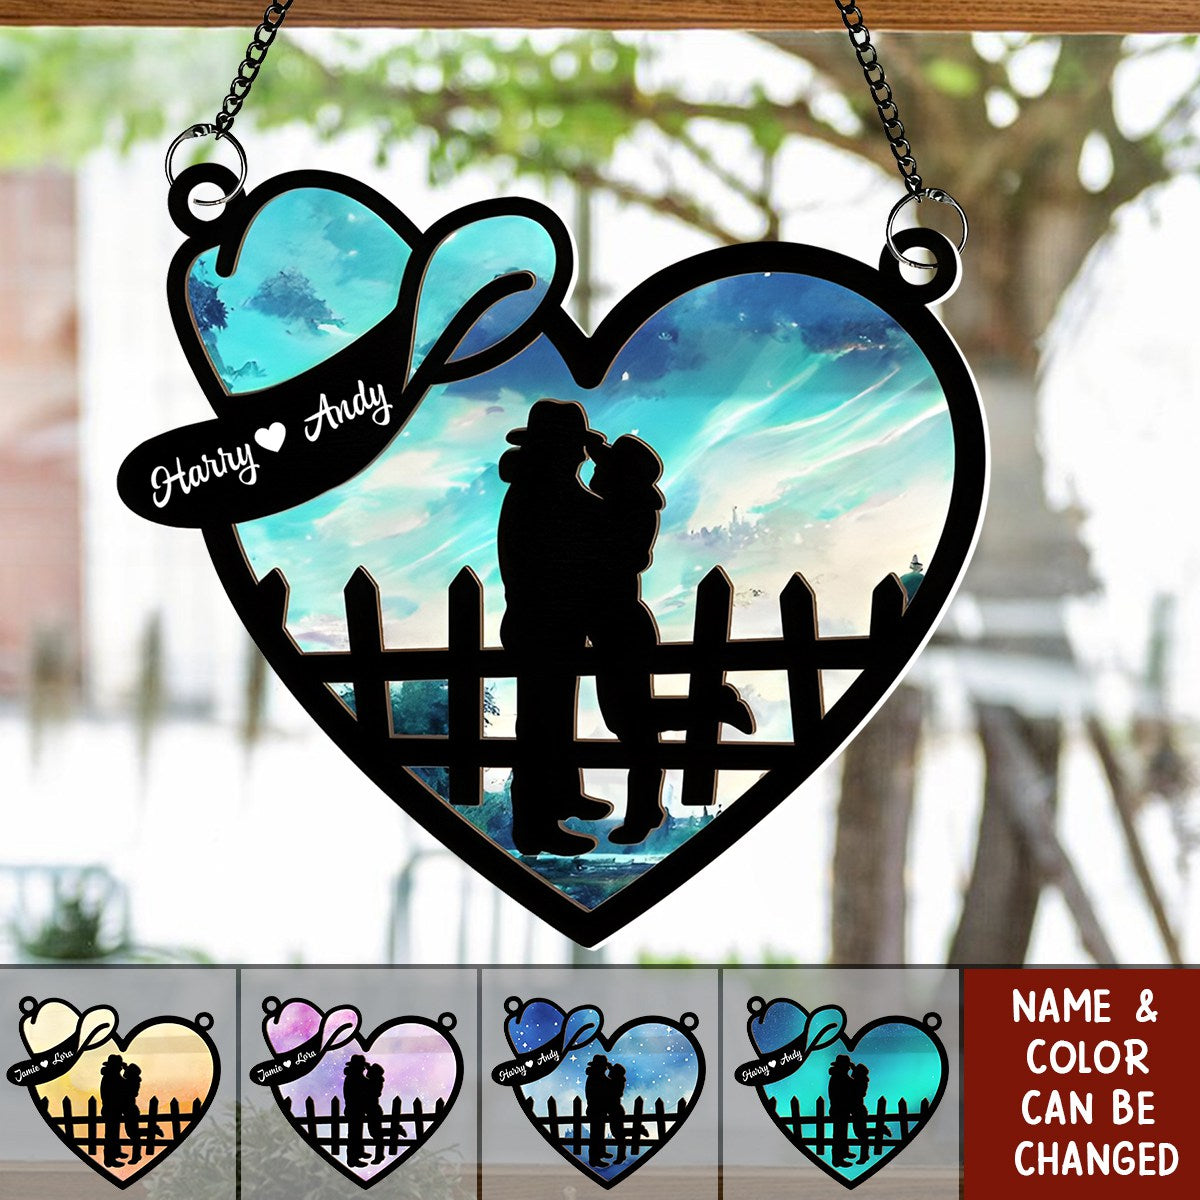 Cowboy And Cowgirl In Love - Personalized Window Hanging Suncatcher Ornament